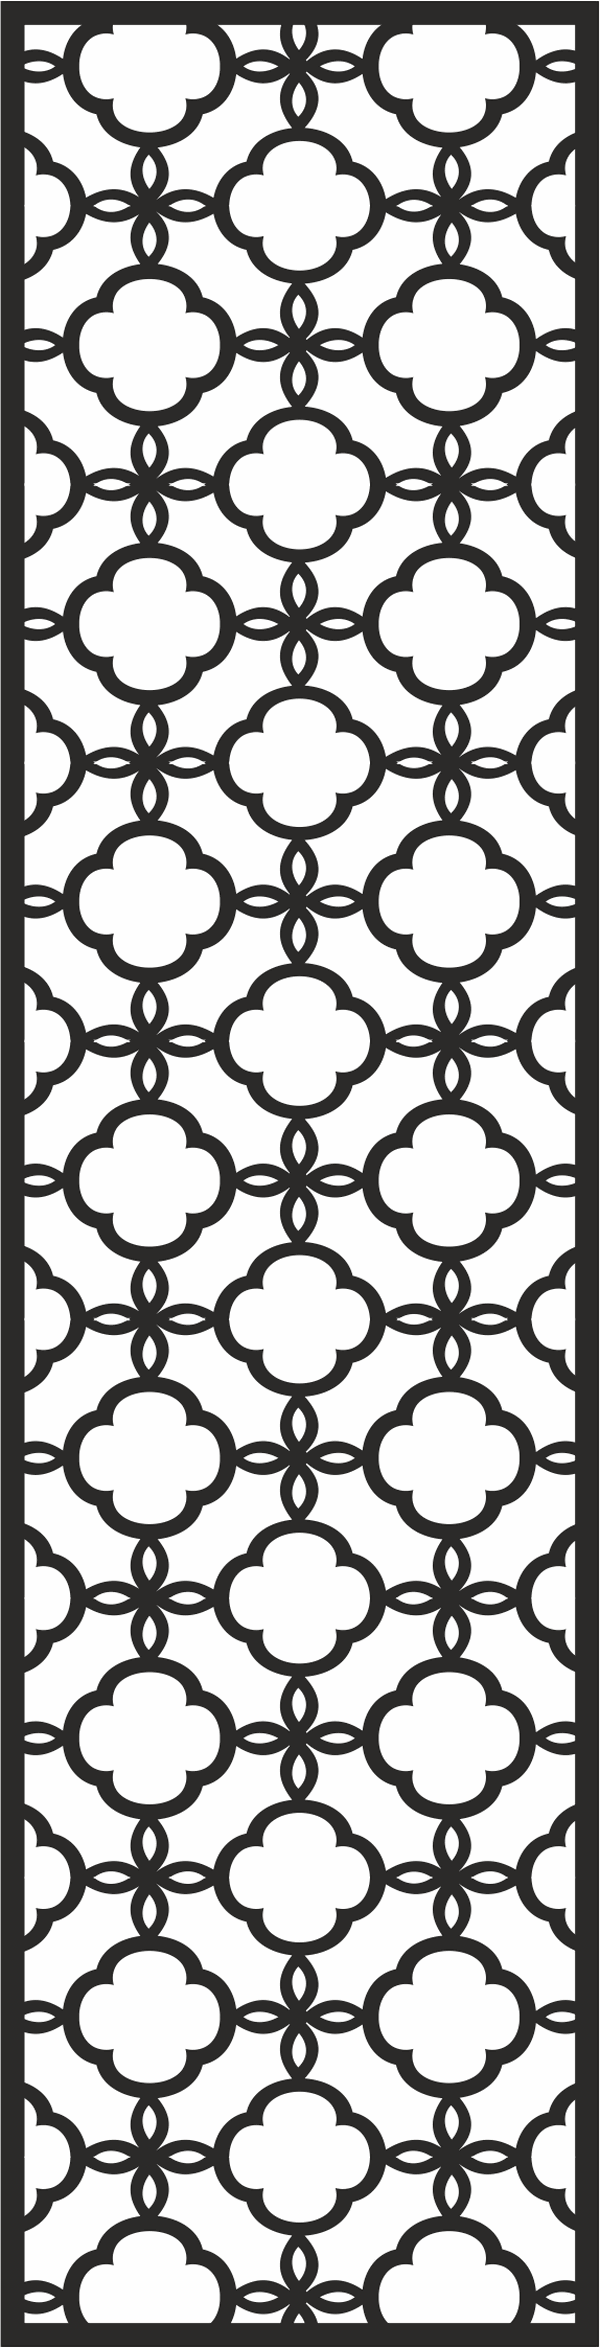 Vetrical Decorative Seamless Design Background Panel CDR File